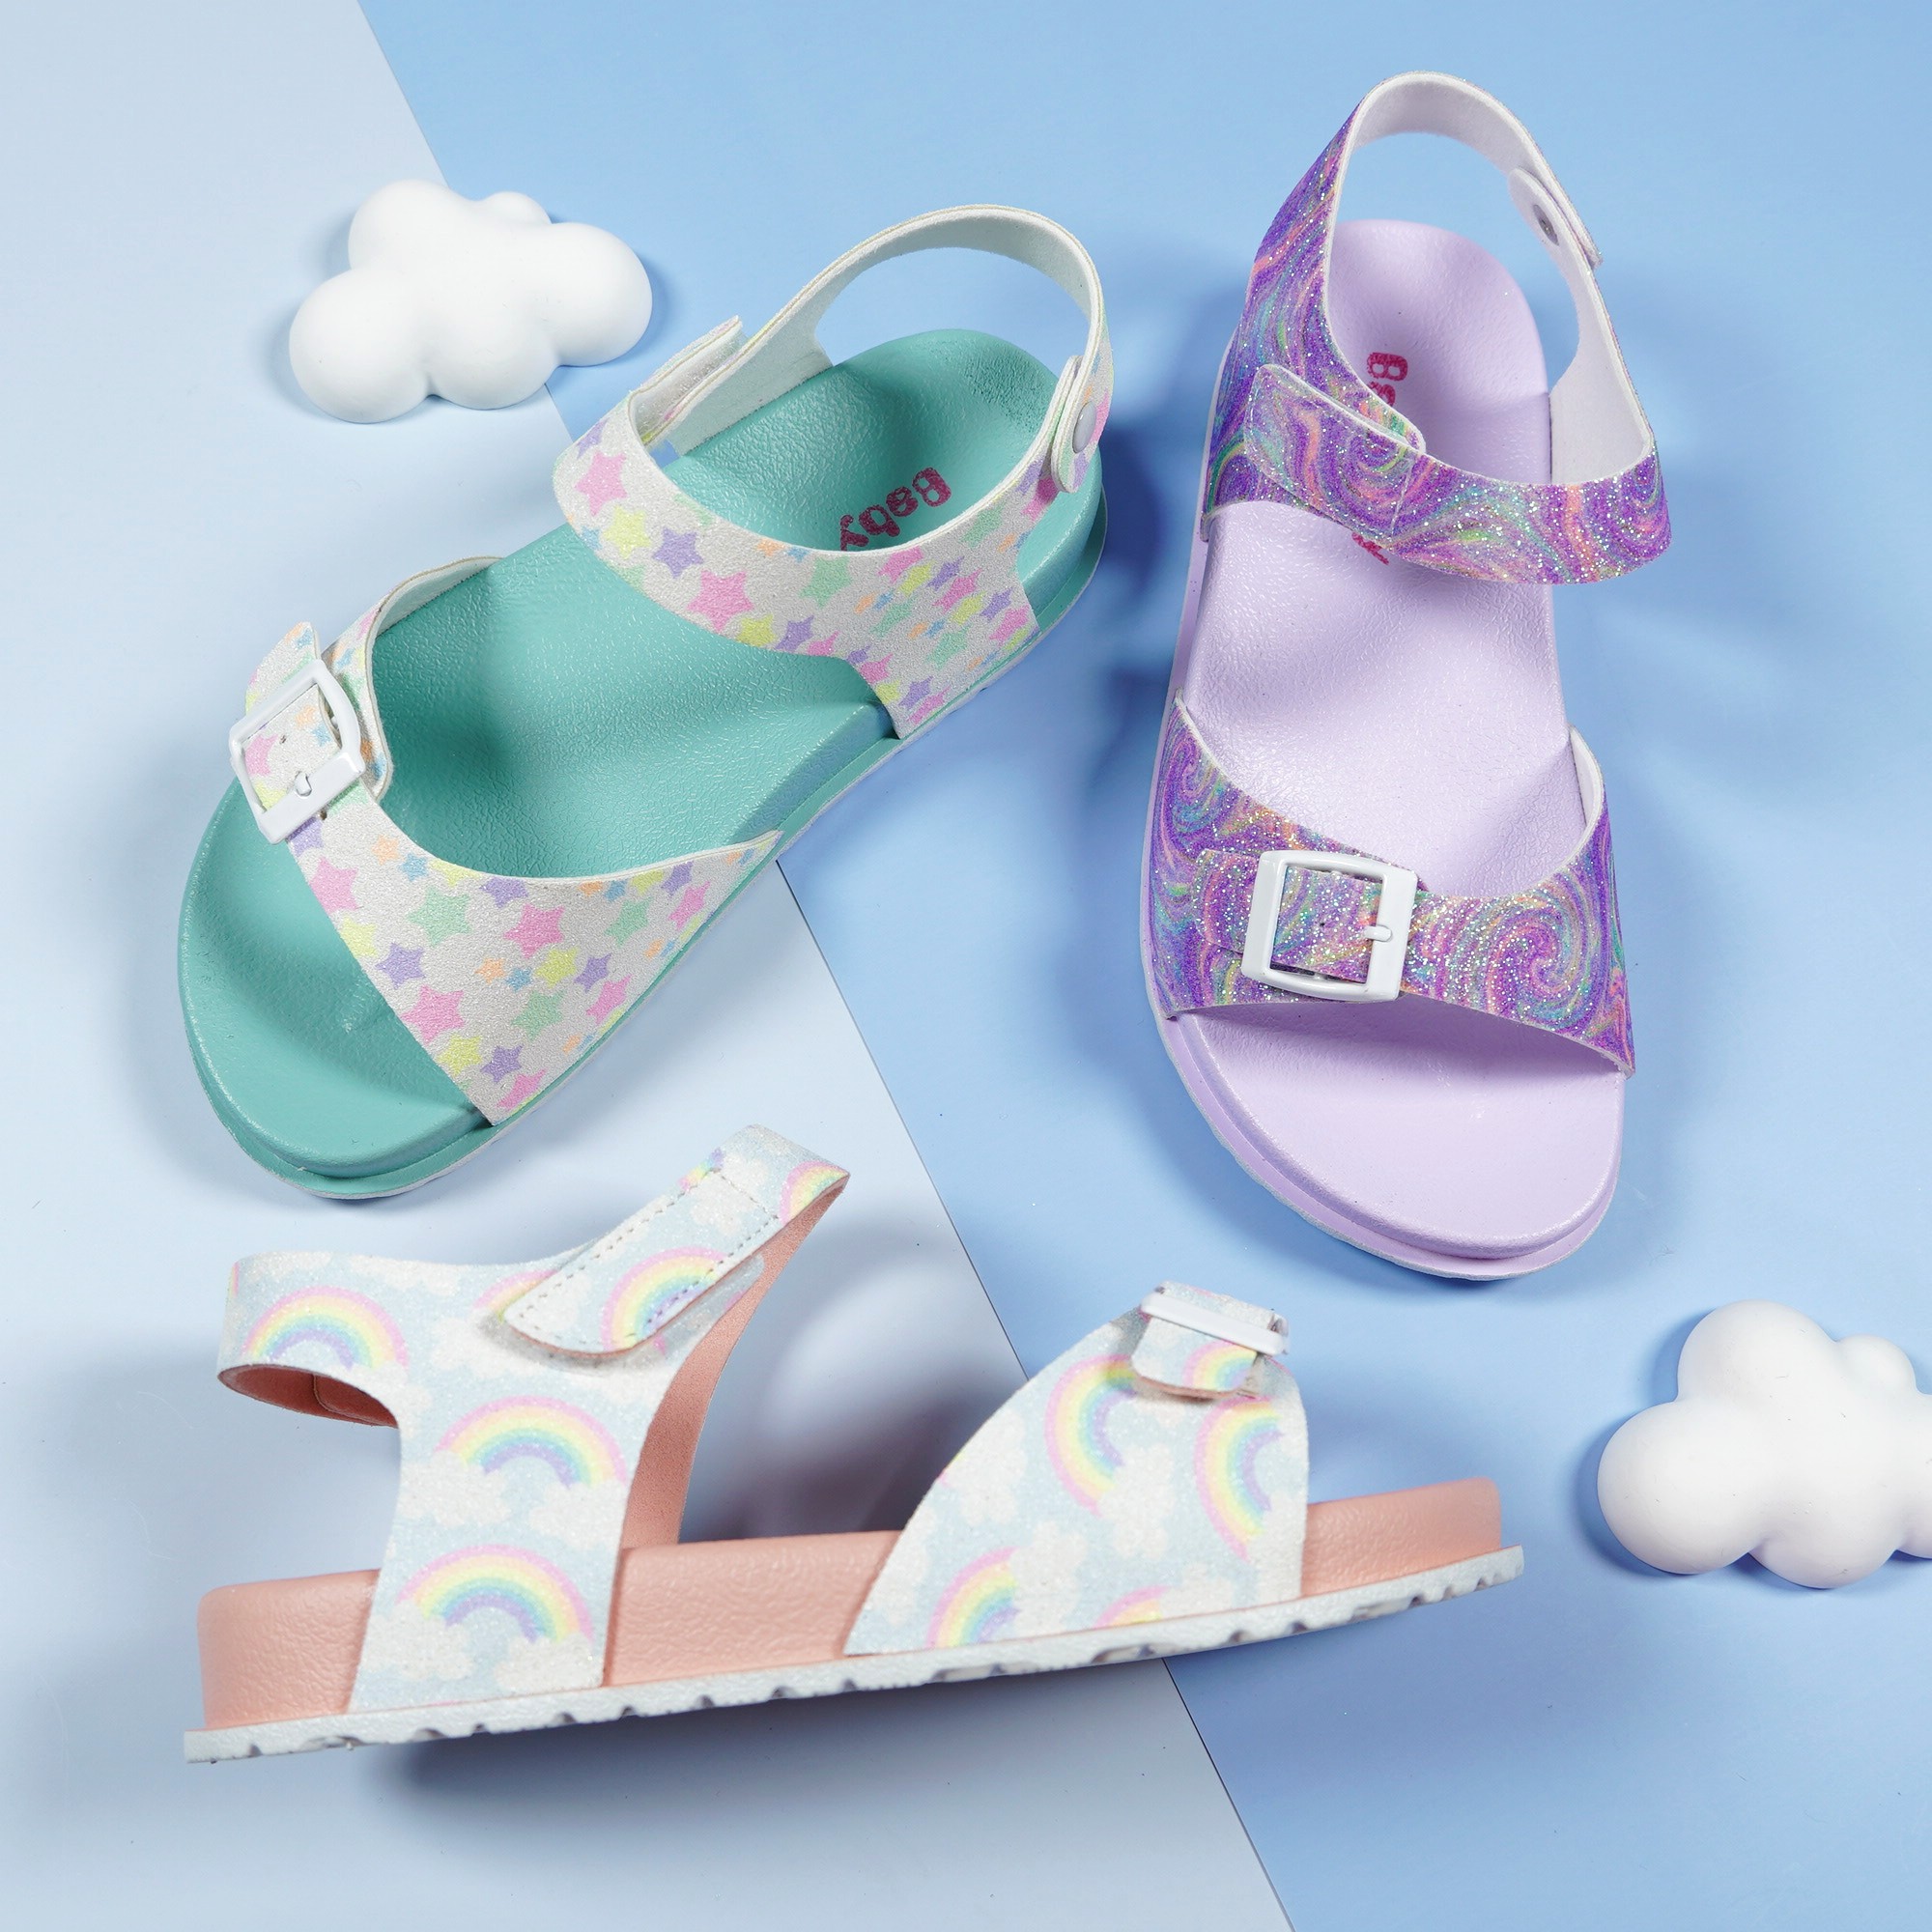 Yidaxing-Cartoon-Starry-Sky-Rainbow-Spotted-Pattern-Glitter-Sandals-for-Children-YDX539B-4